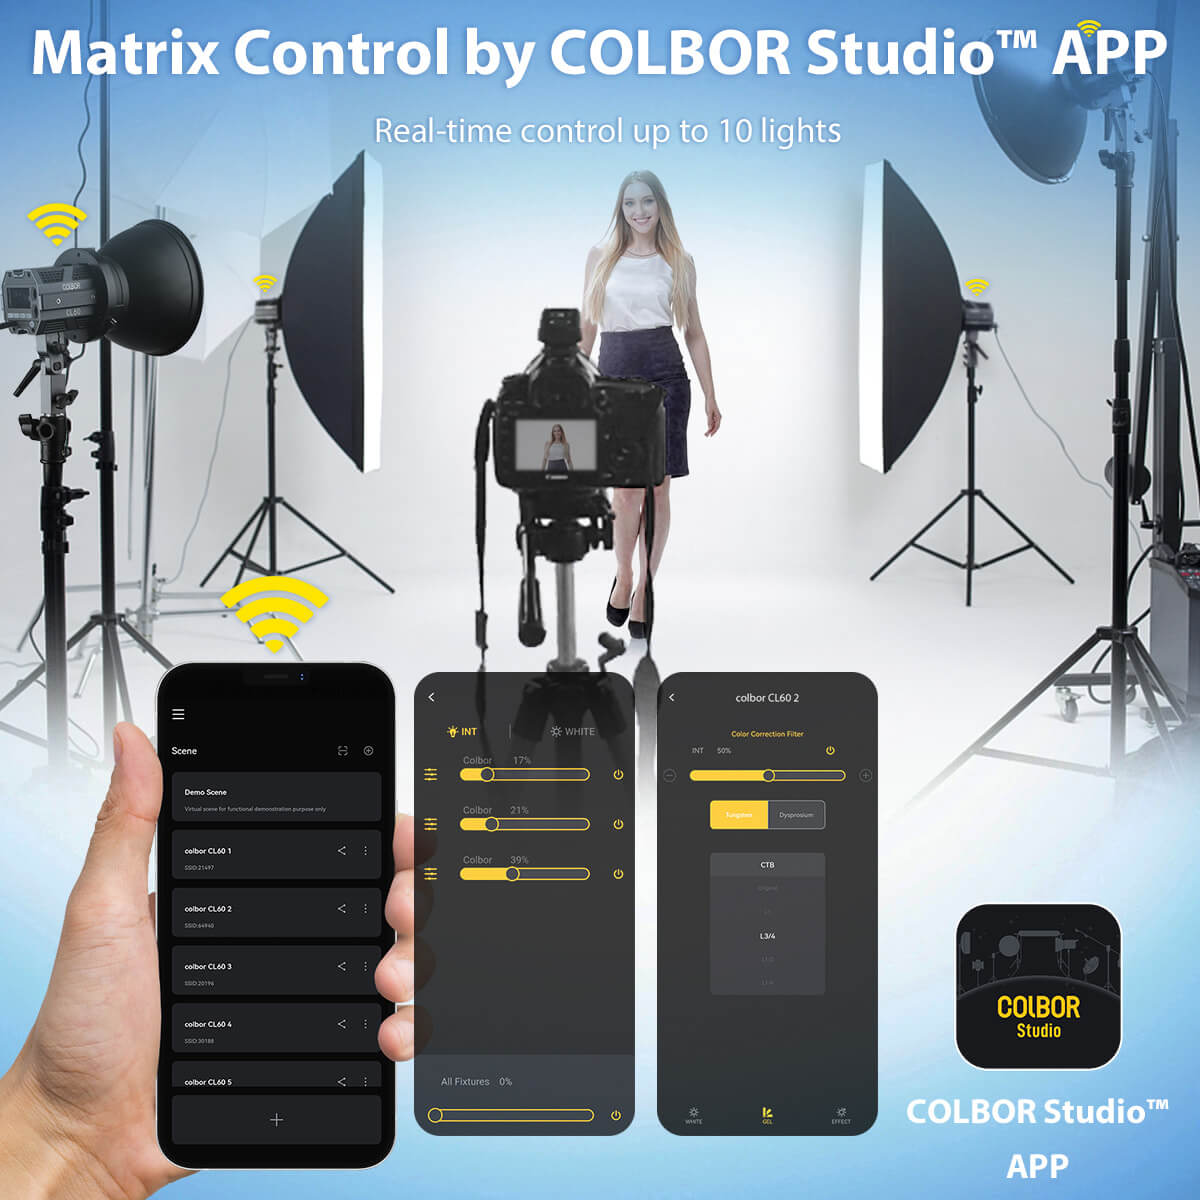 COLBOR CL60 studio lighting for video can be matrix controlled by COLBOR Studio™ APP. The real-time control is up to 10 lights